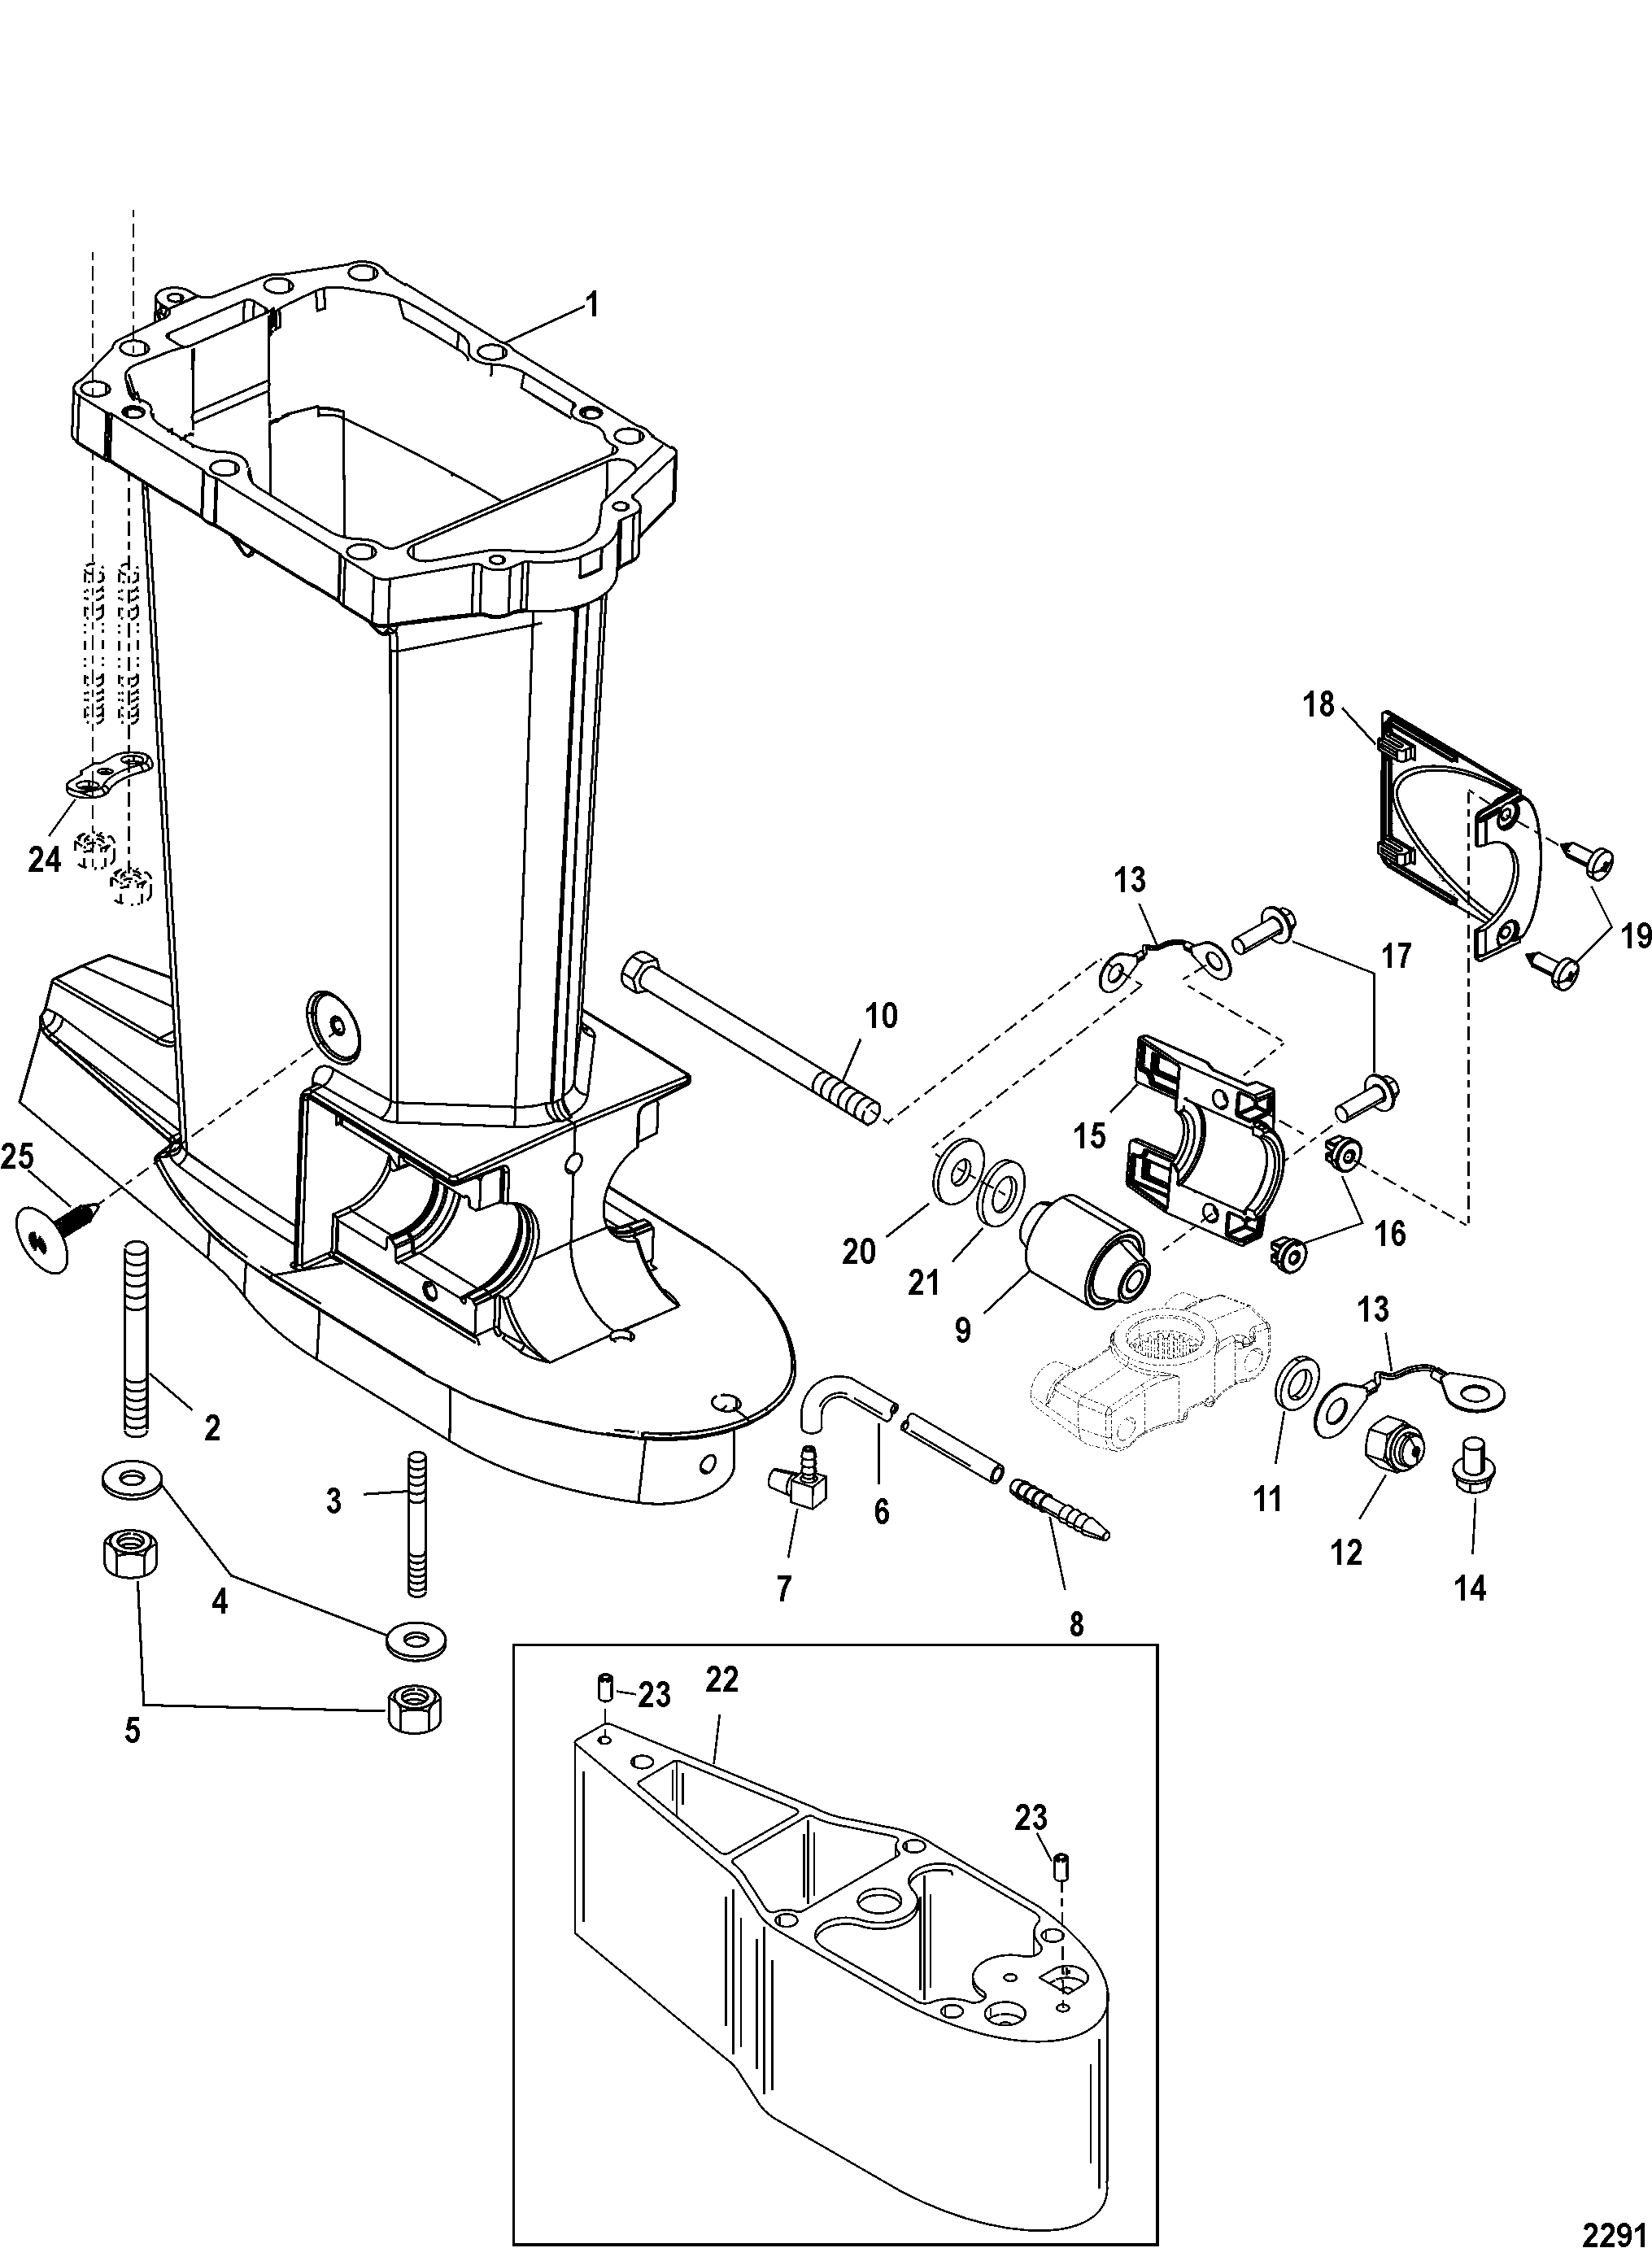 Driveshaft Housing, USA-0T801000/ BEL-0P268000 and Up